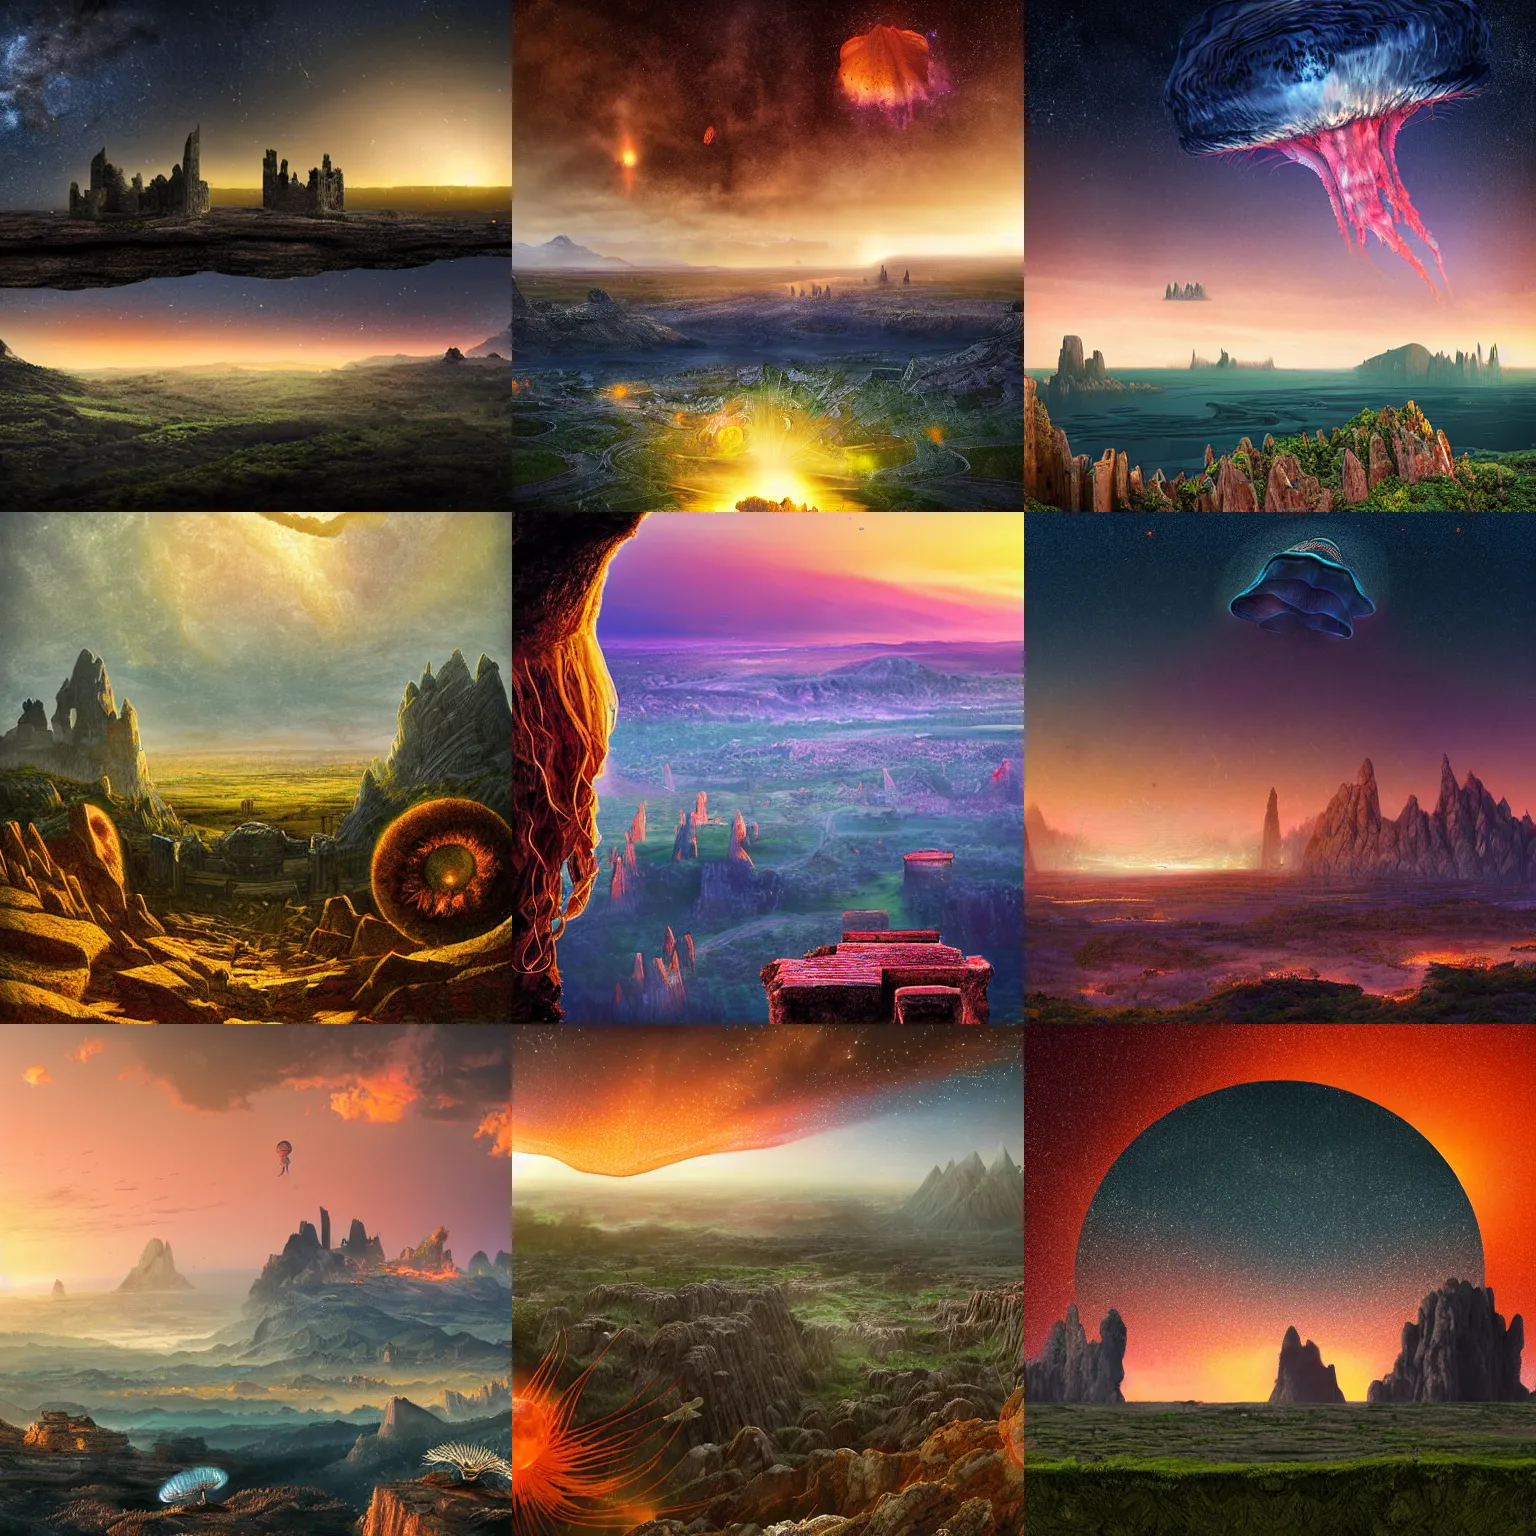 Prompt: digital art perspective shot from a ledge high in the air of a massive varied and ancient fantasy landscape, ruins and cities in the distance, jagged mountains in the background at the edges of the landscape, centered on a bright orange gigantic jellyfish hovering in the distant twilight sky in the middle of the frame, illuminated stars and galaxies, verdant field in the foreground